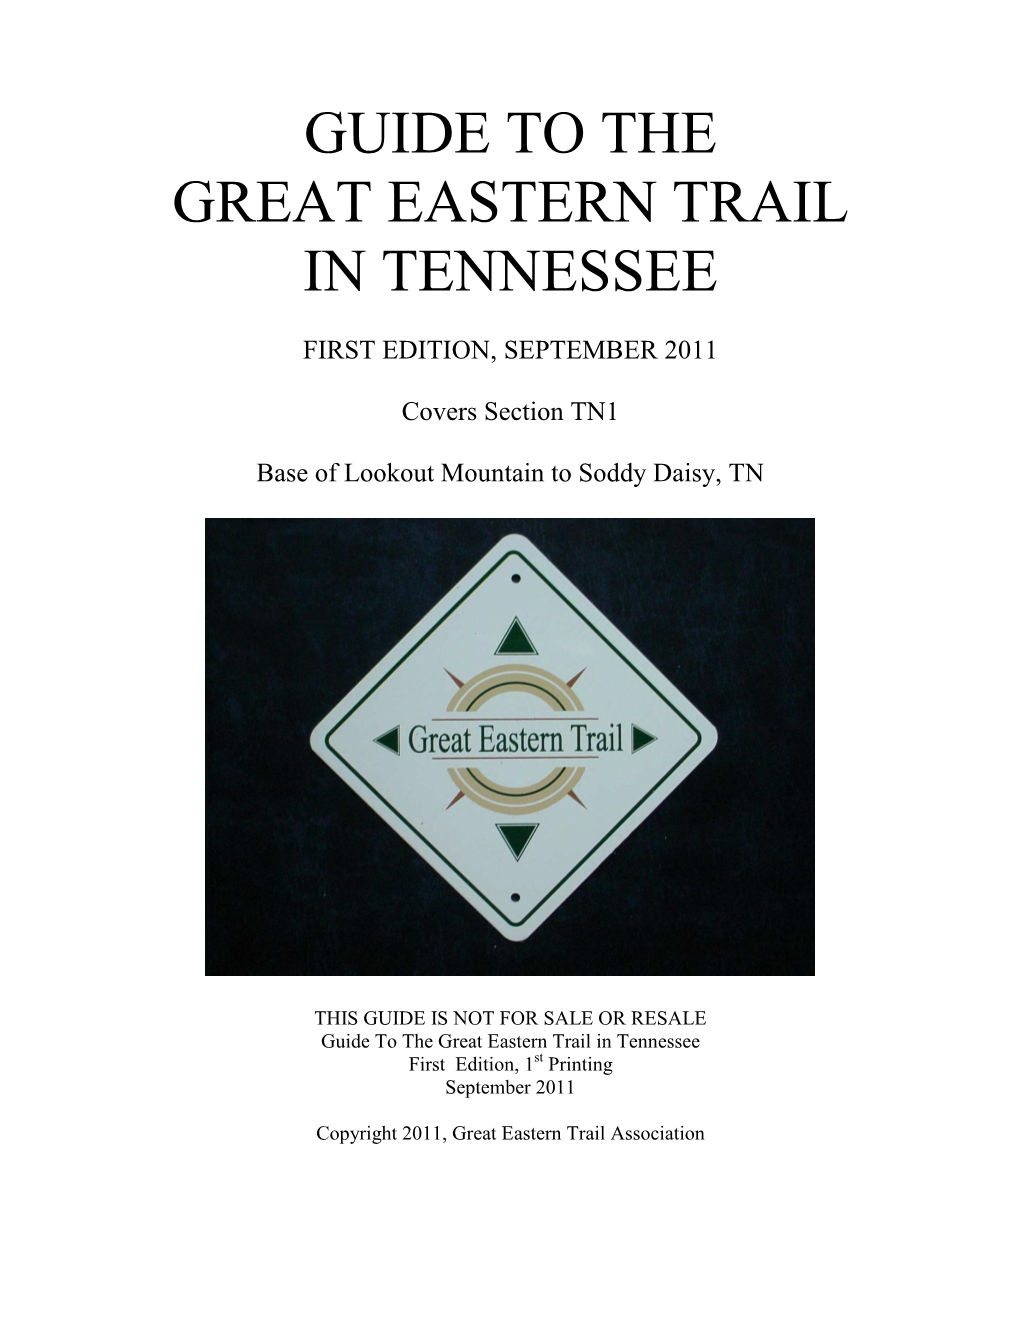 Guide to the Great Eastern Trail in Tennessee First Edition, September